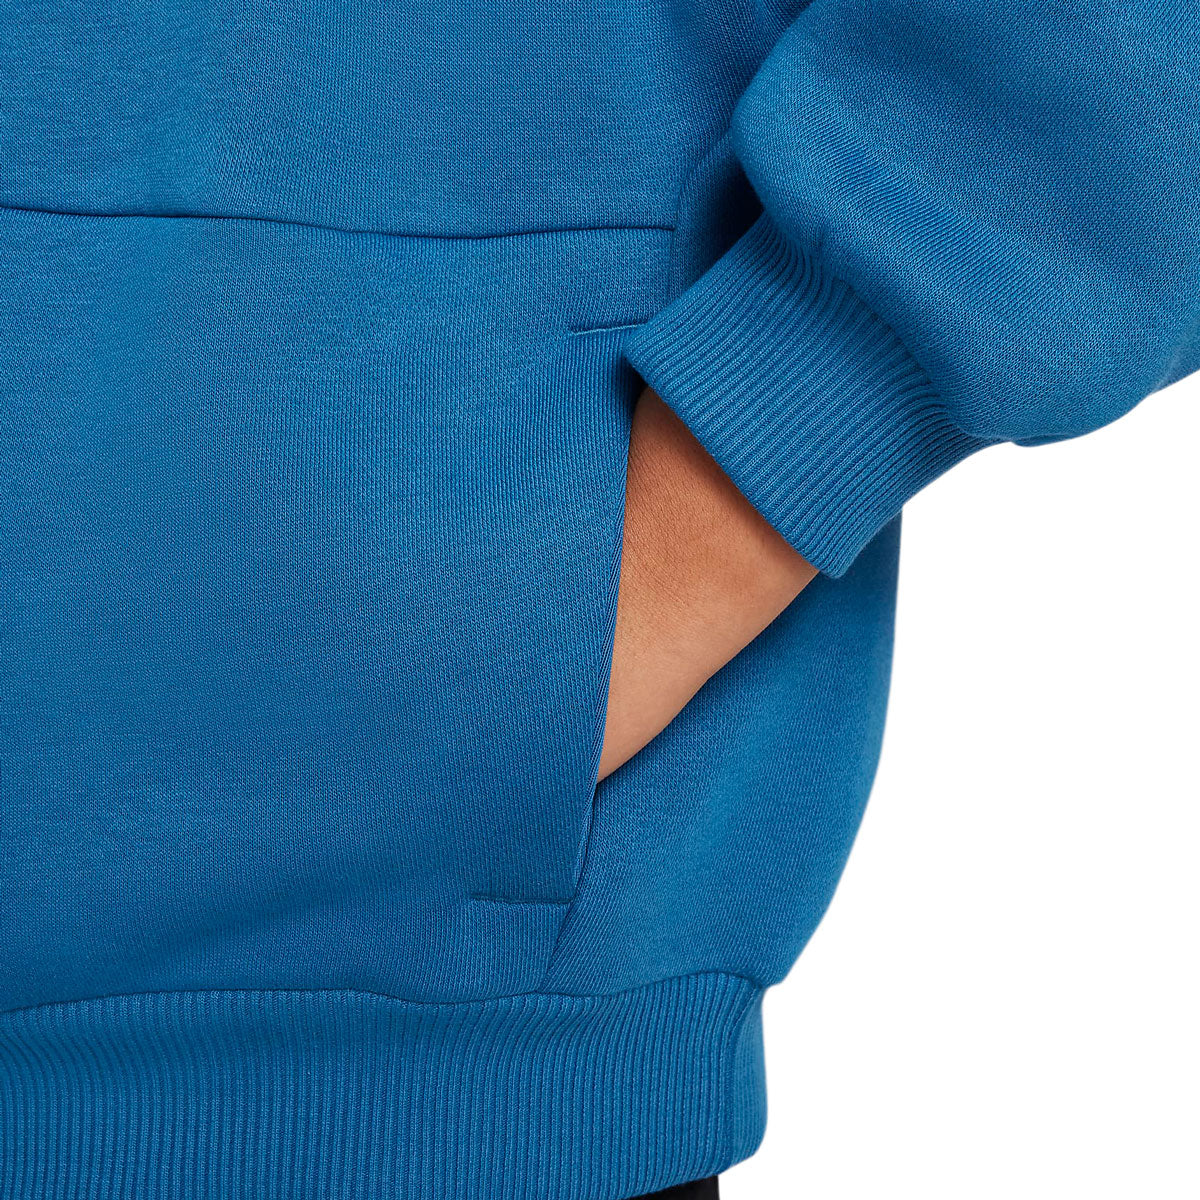 Nike SB Youth Icon Hoodie - Industrial Blue/White image 4